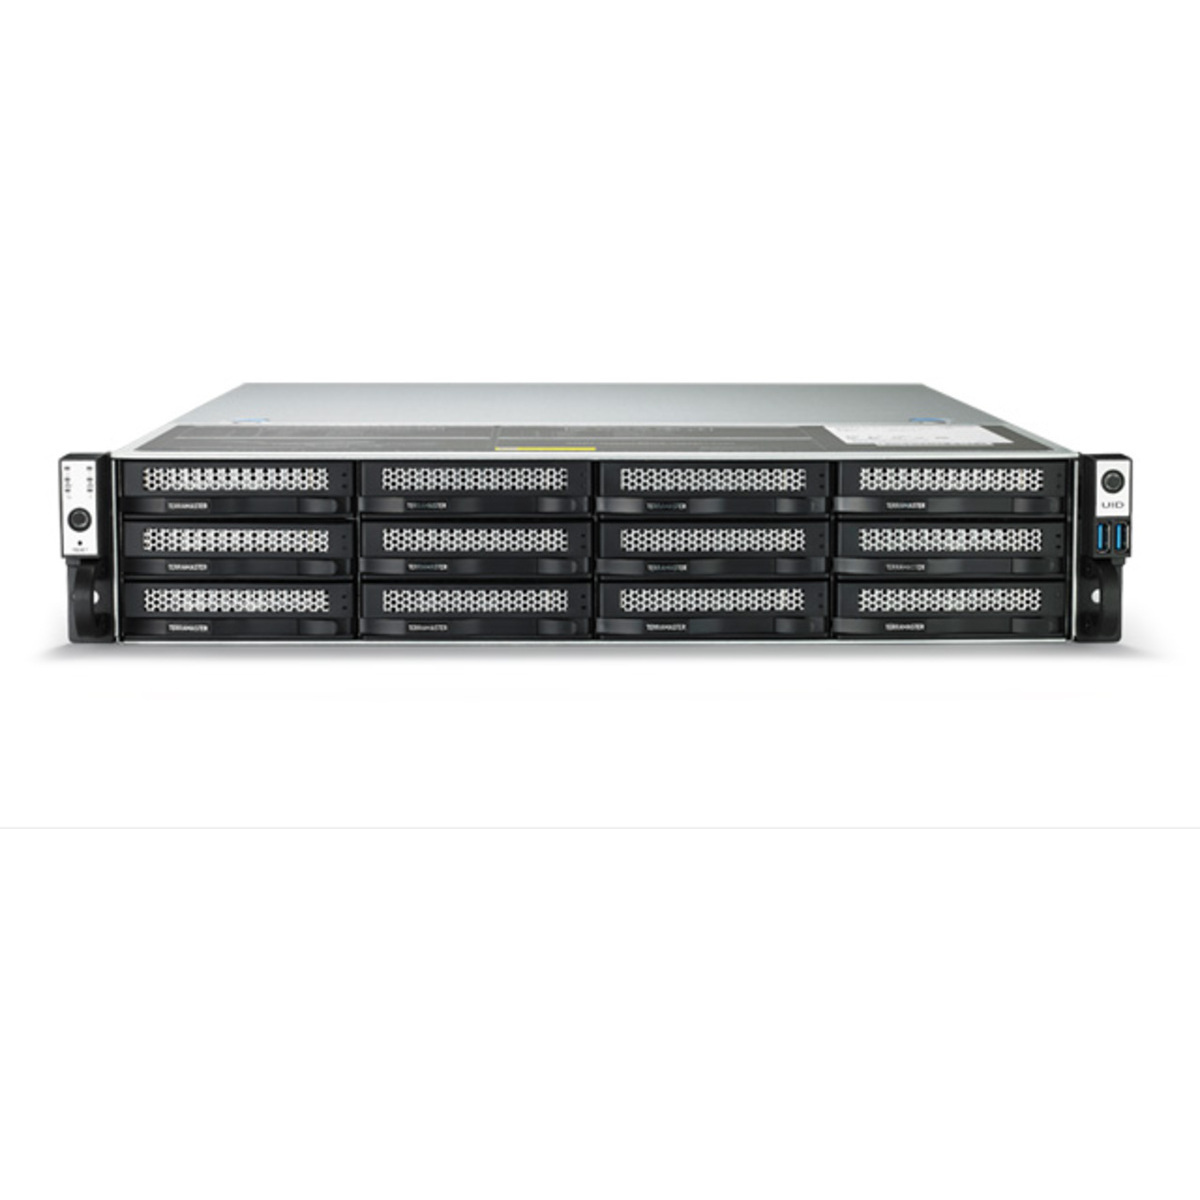 TerraMaster U12-722-2224 160tb 12-Bay RackMount Large Business / Enterprise NAS - Network Attached Storage Device 10x16tb Seagate EXOS X18 ST16000NM000J 3.5 7200rpm SATA 6Gb/s HDD ENTERPRISE Class Drives Installed - Burn-In Tested U12-722-2224